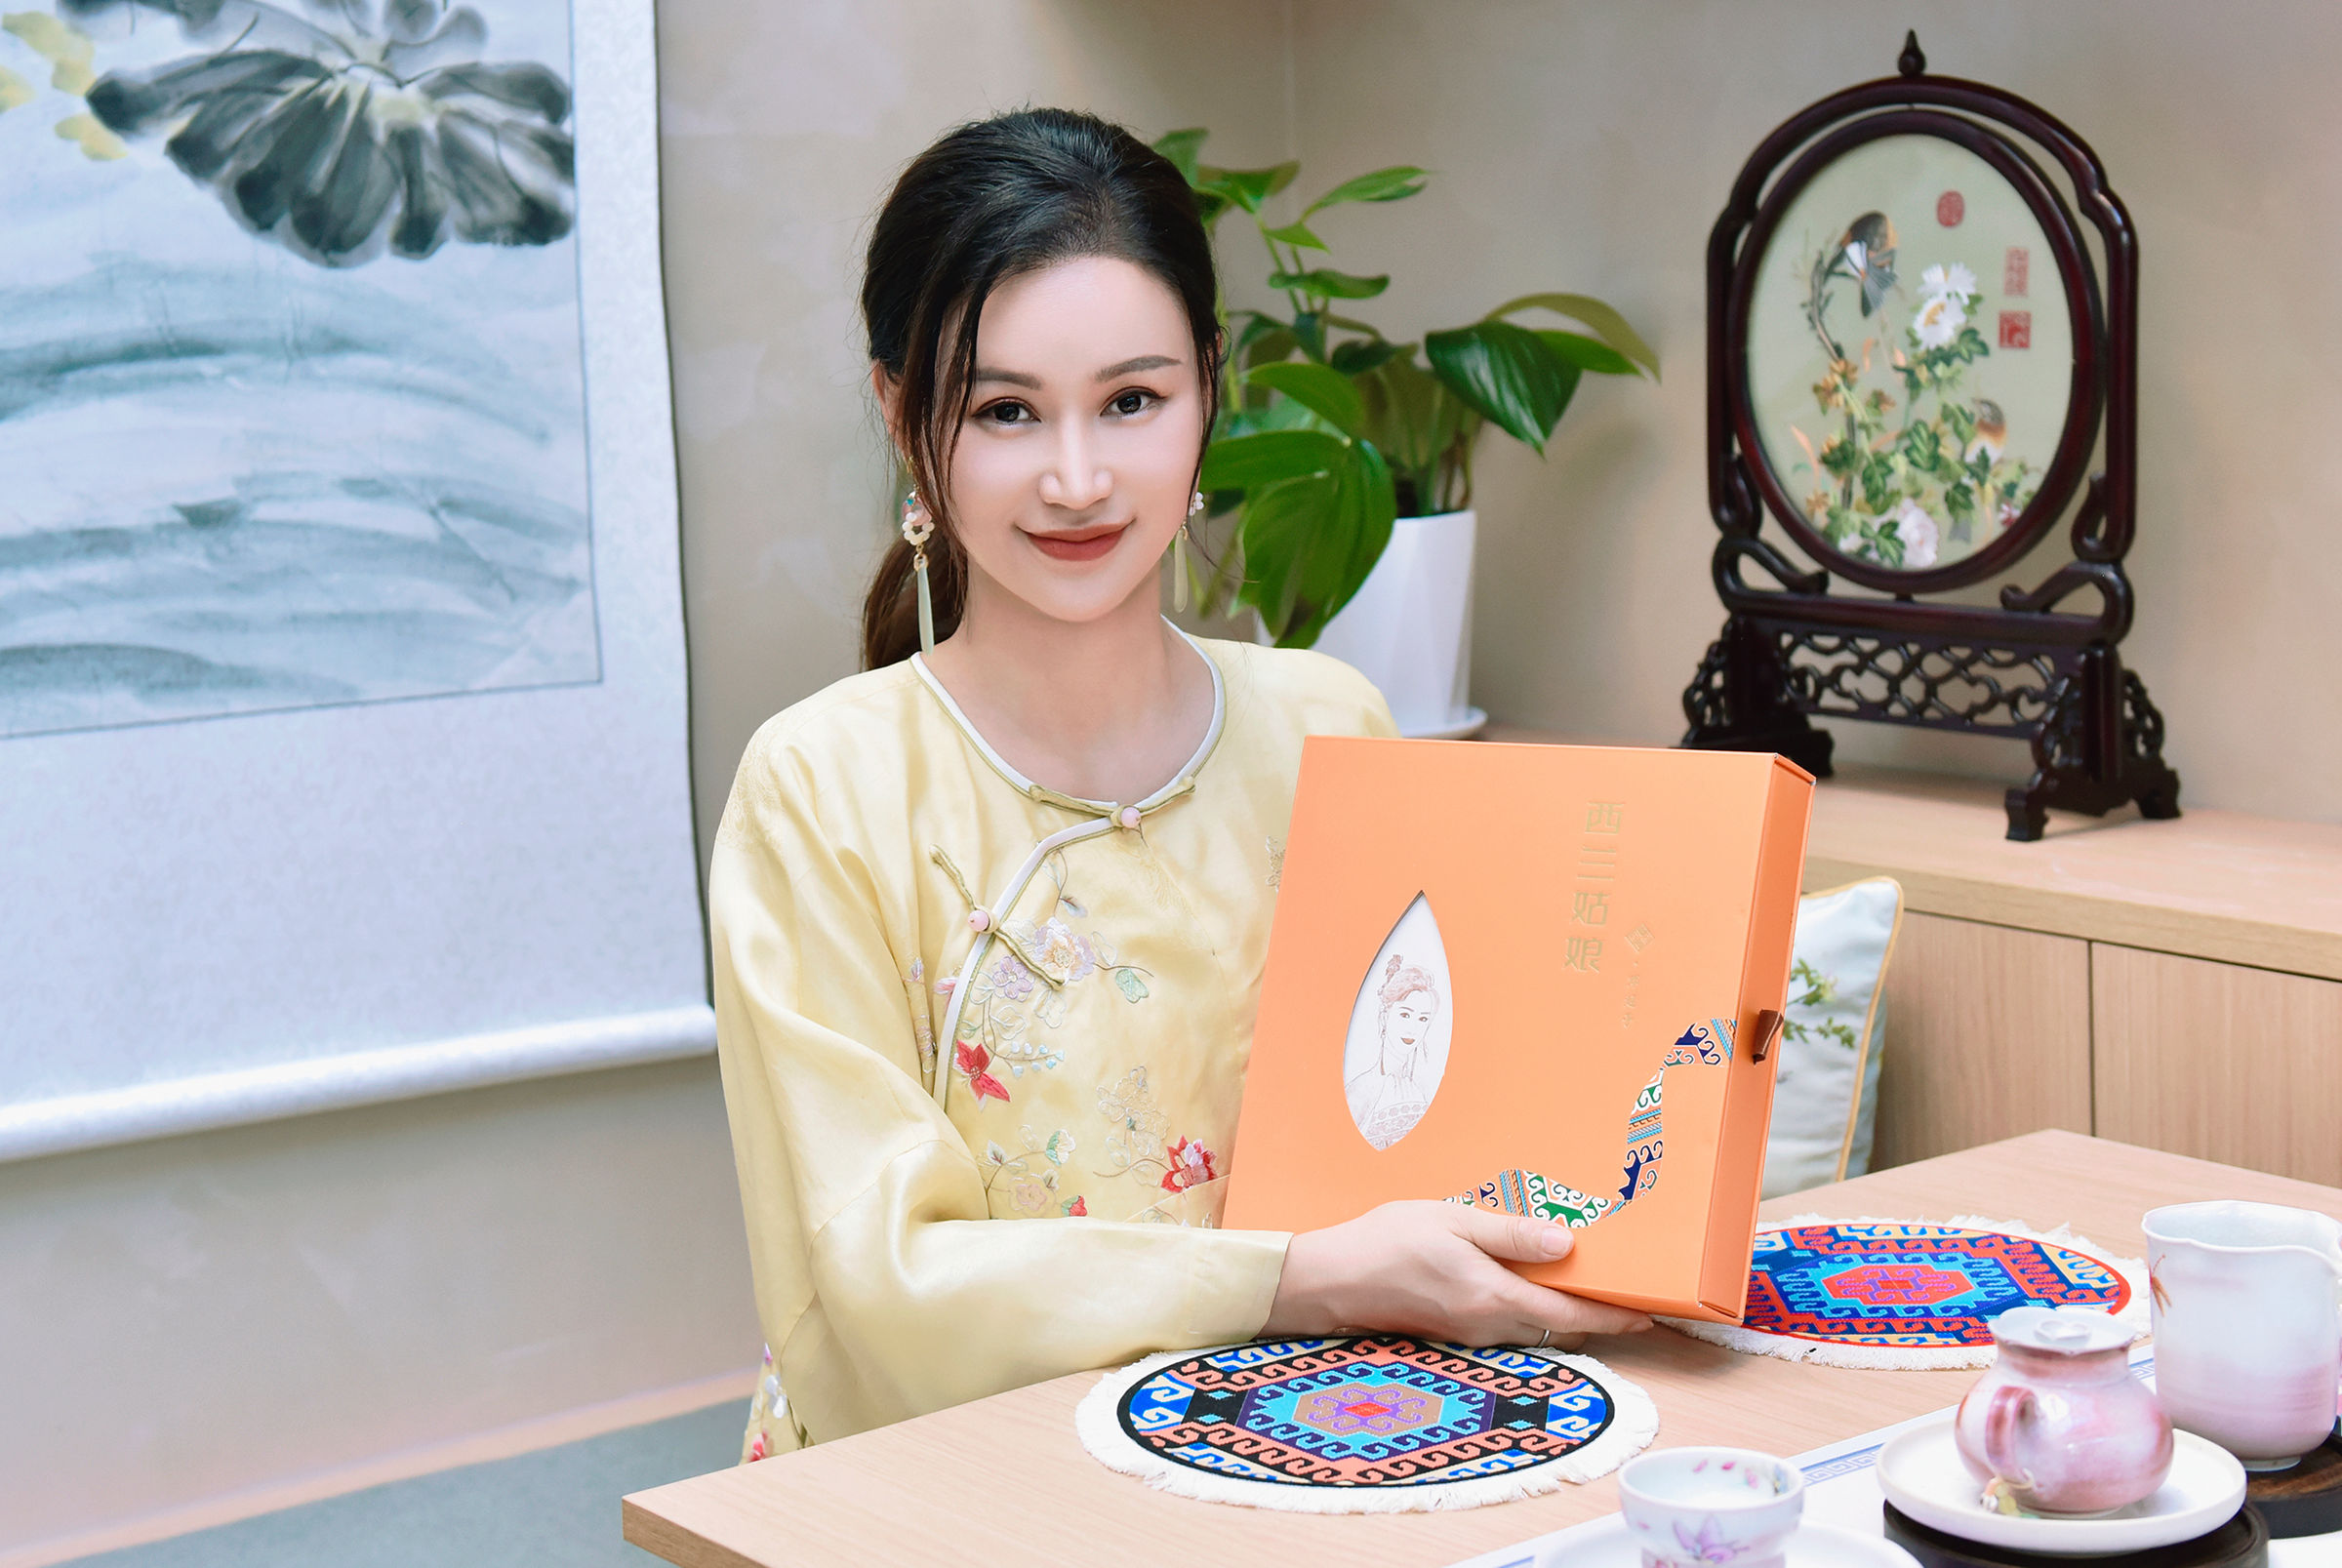 Tujia Woman Promotes Ethnic Culture Through Literature, Songs